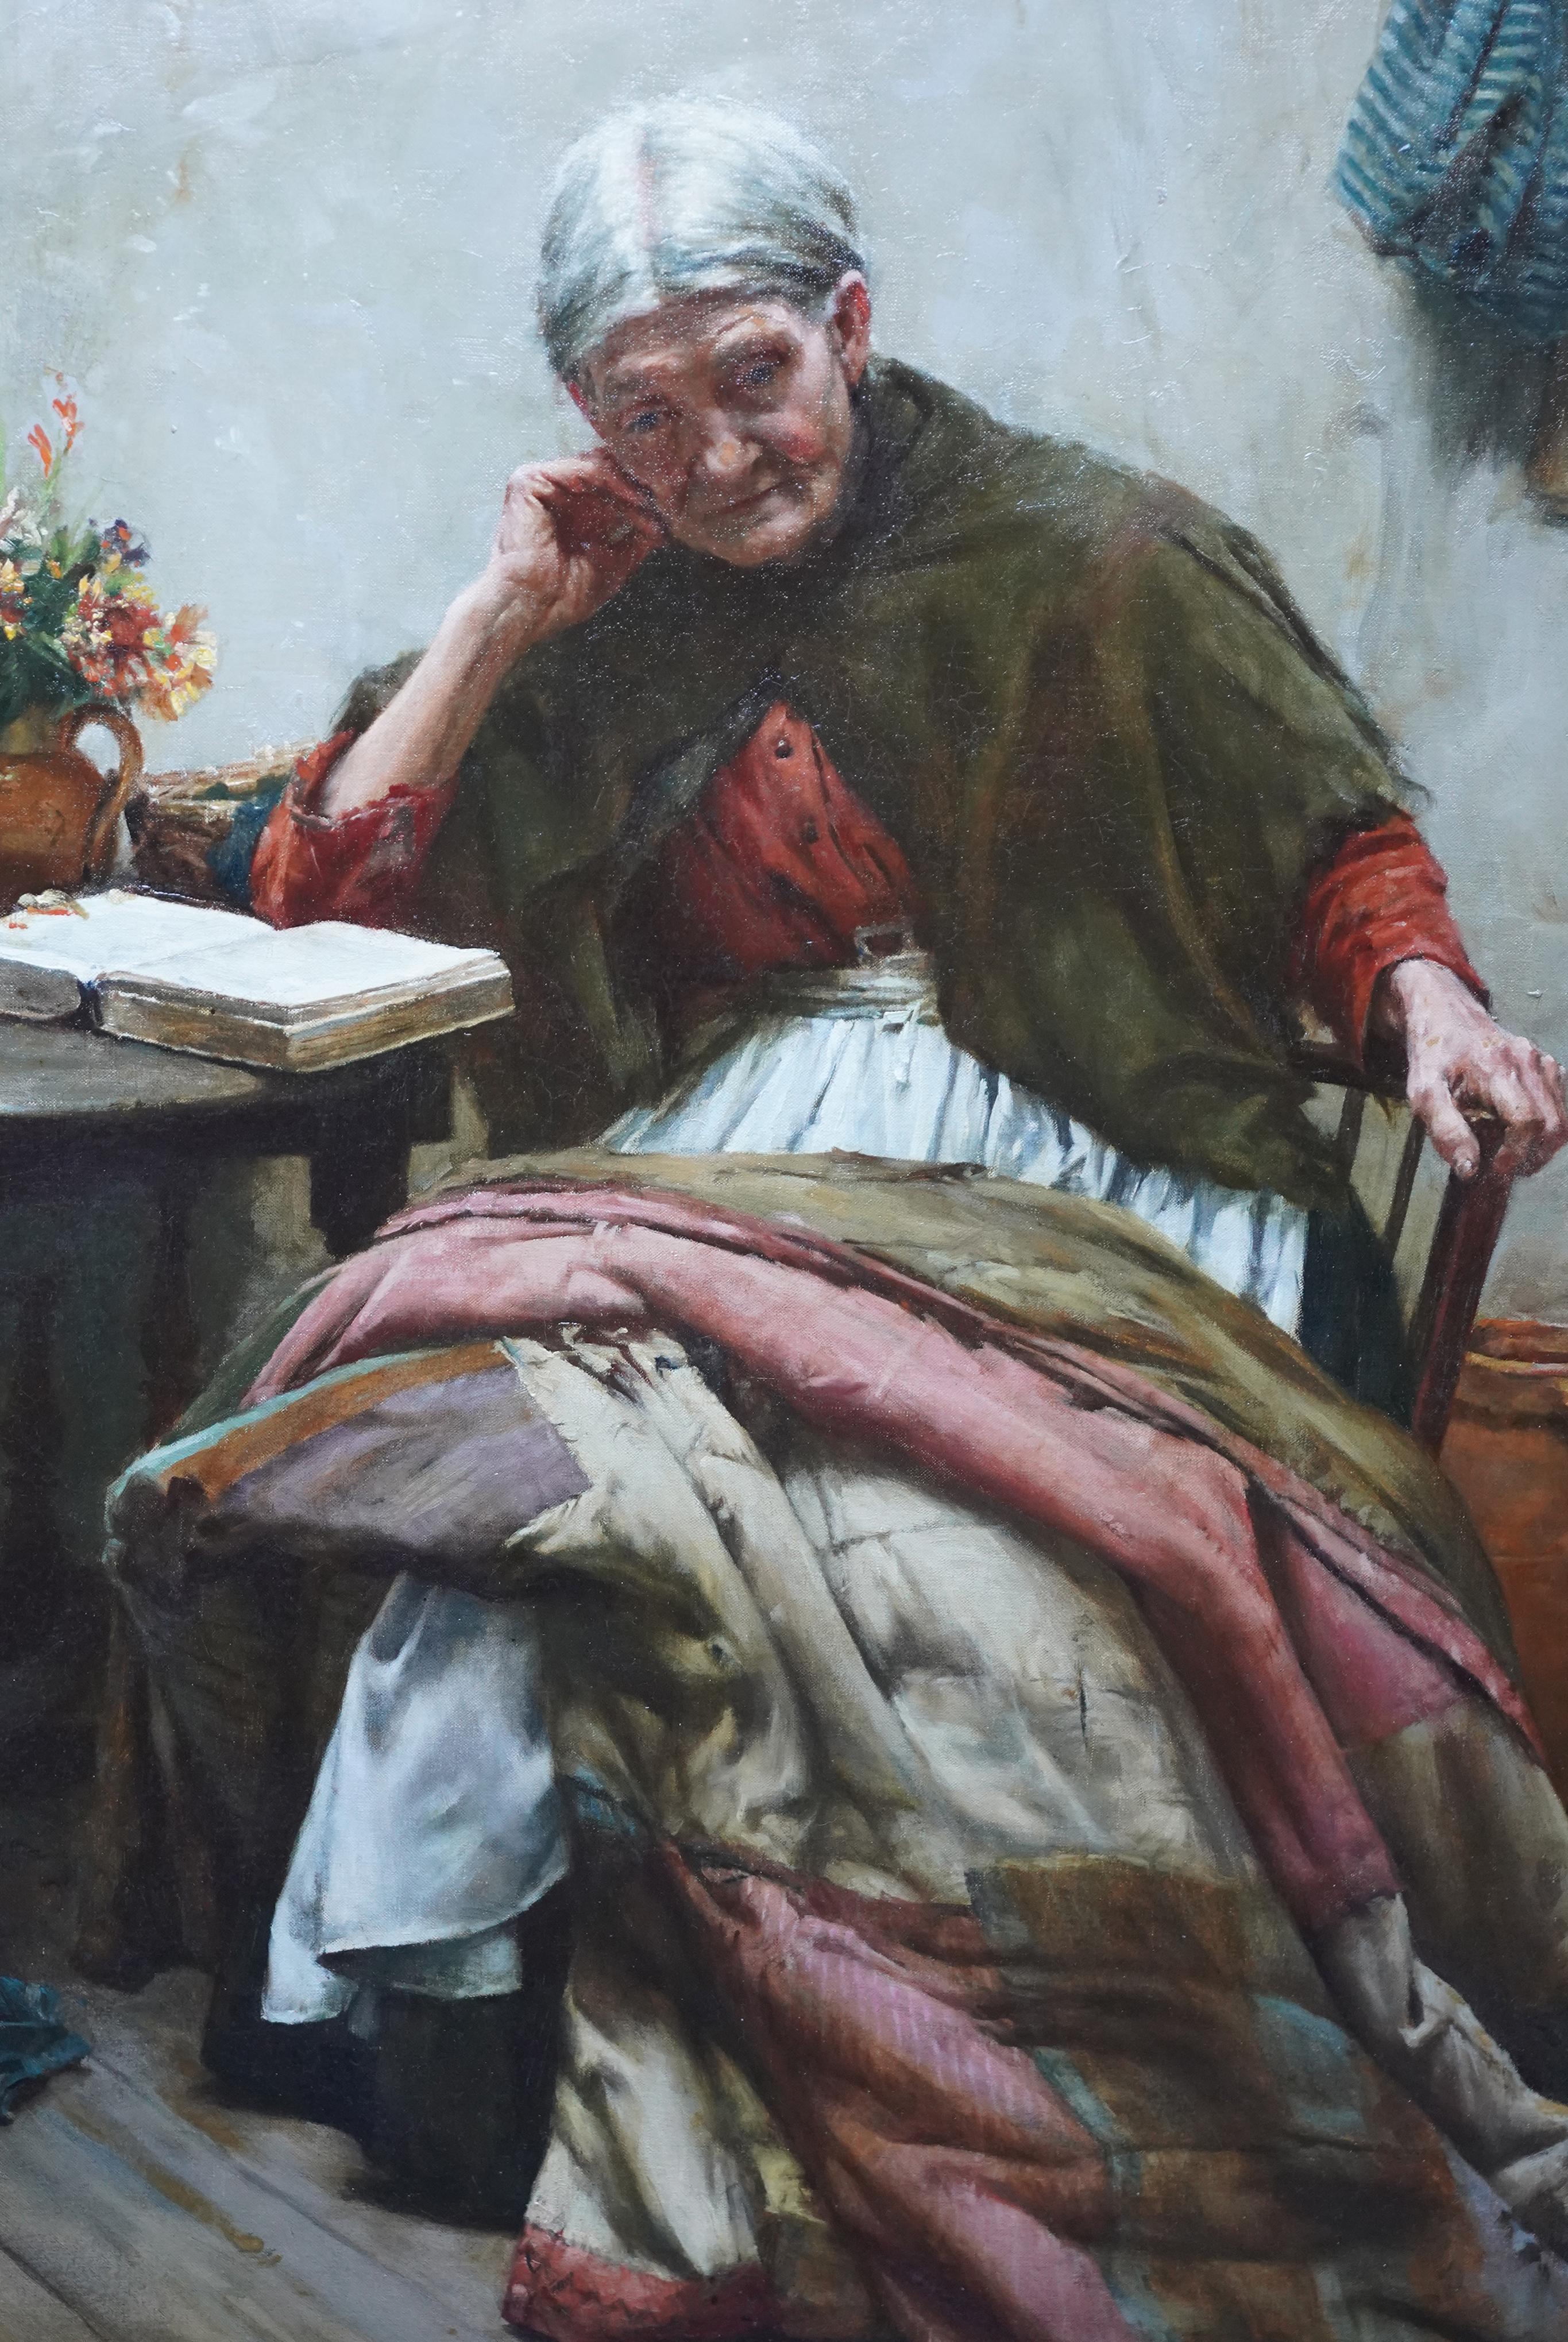 This stunning, large British Edwardian Newlyn School interior portrait oil painting is by much noted and exhibited artist Walter Langley. Originally from Birmingham, Langley and his family moved to St Ives in 1881. He was one of the first artists to